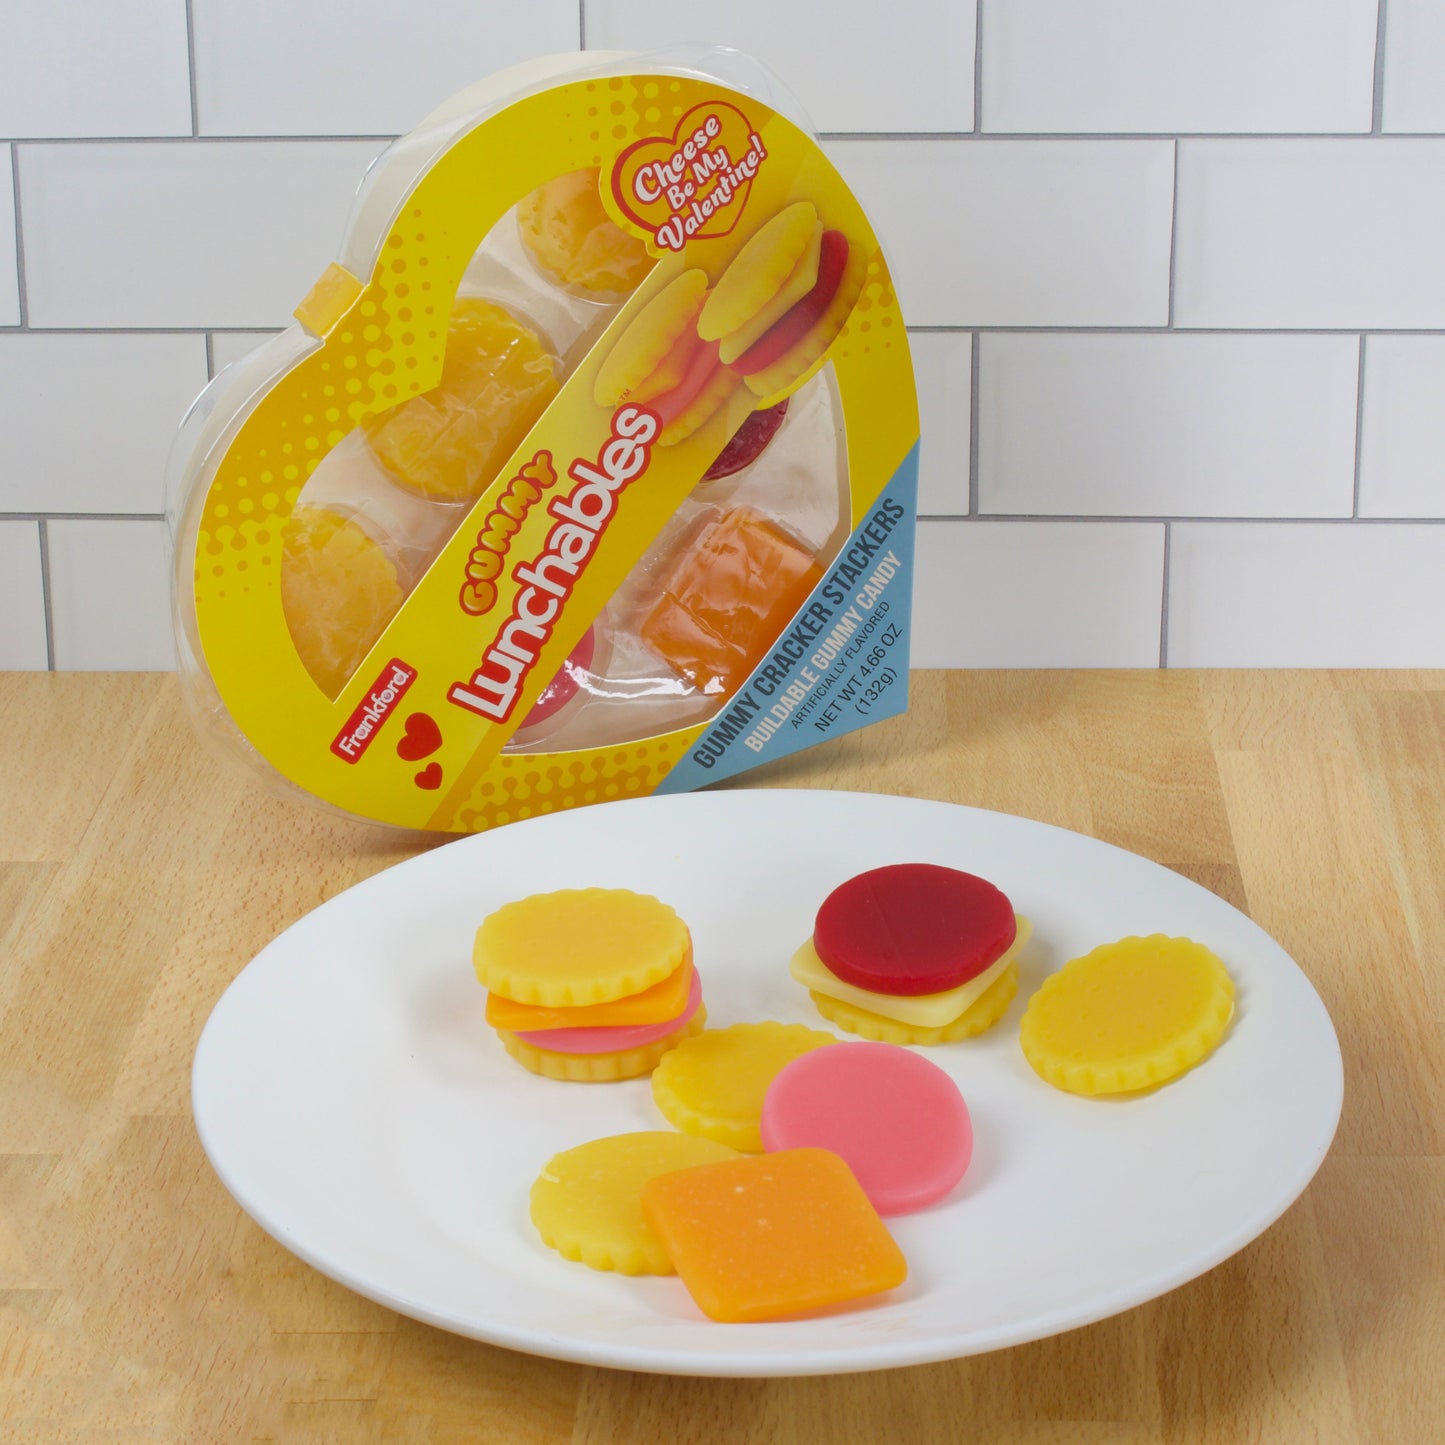 Yellow heart shaped box on its side with plate of gummy cracker stacks